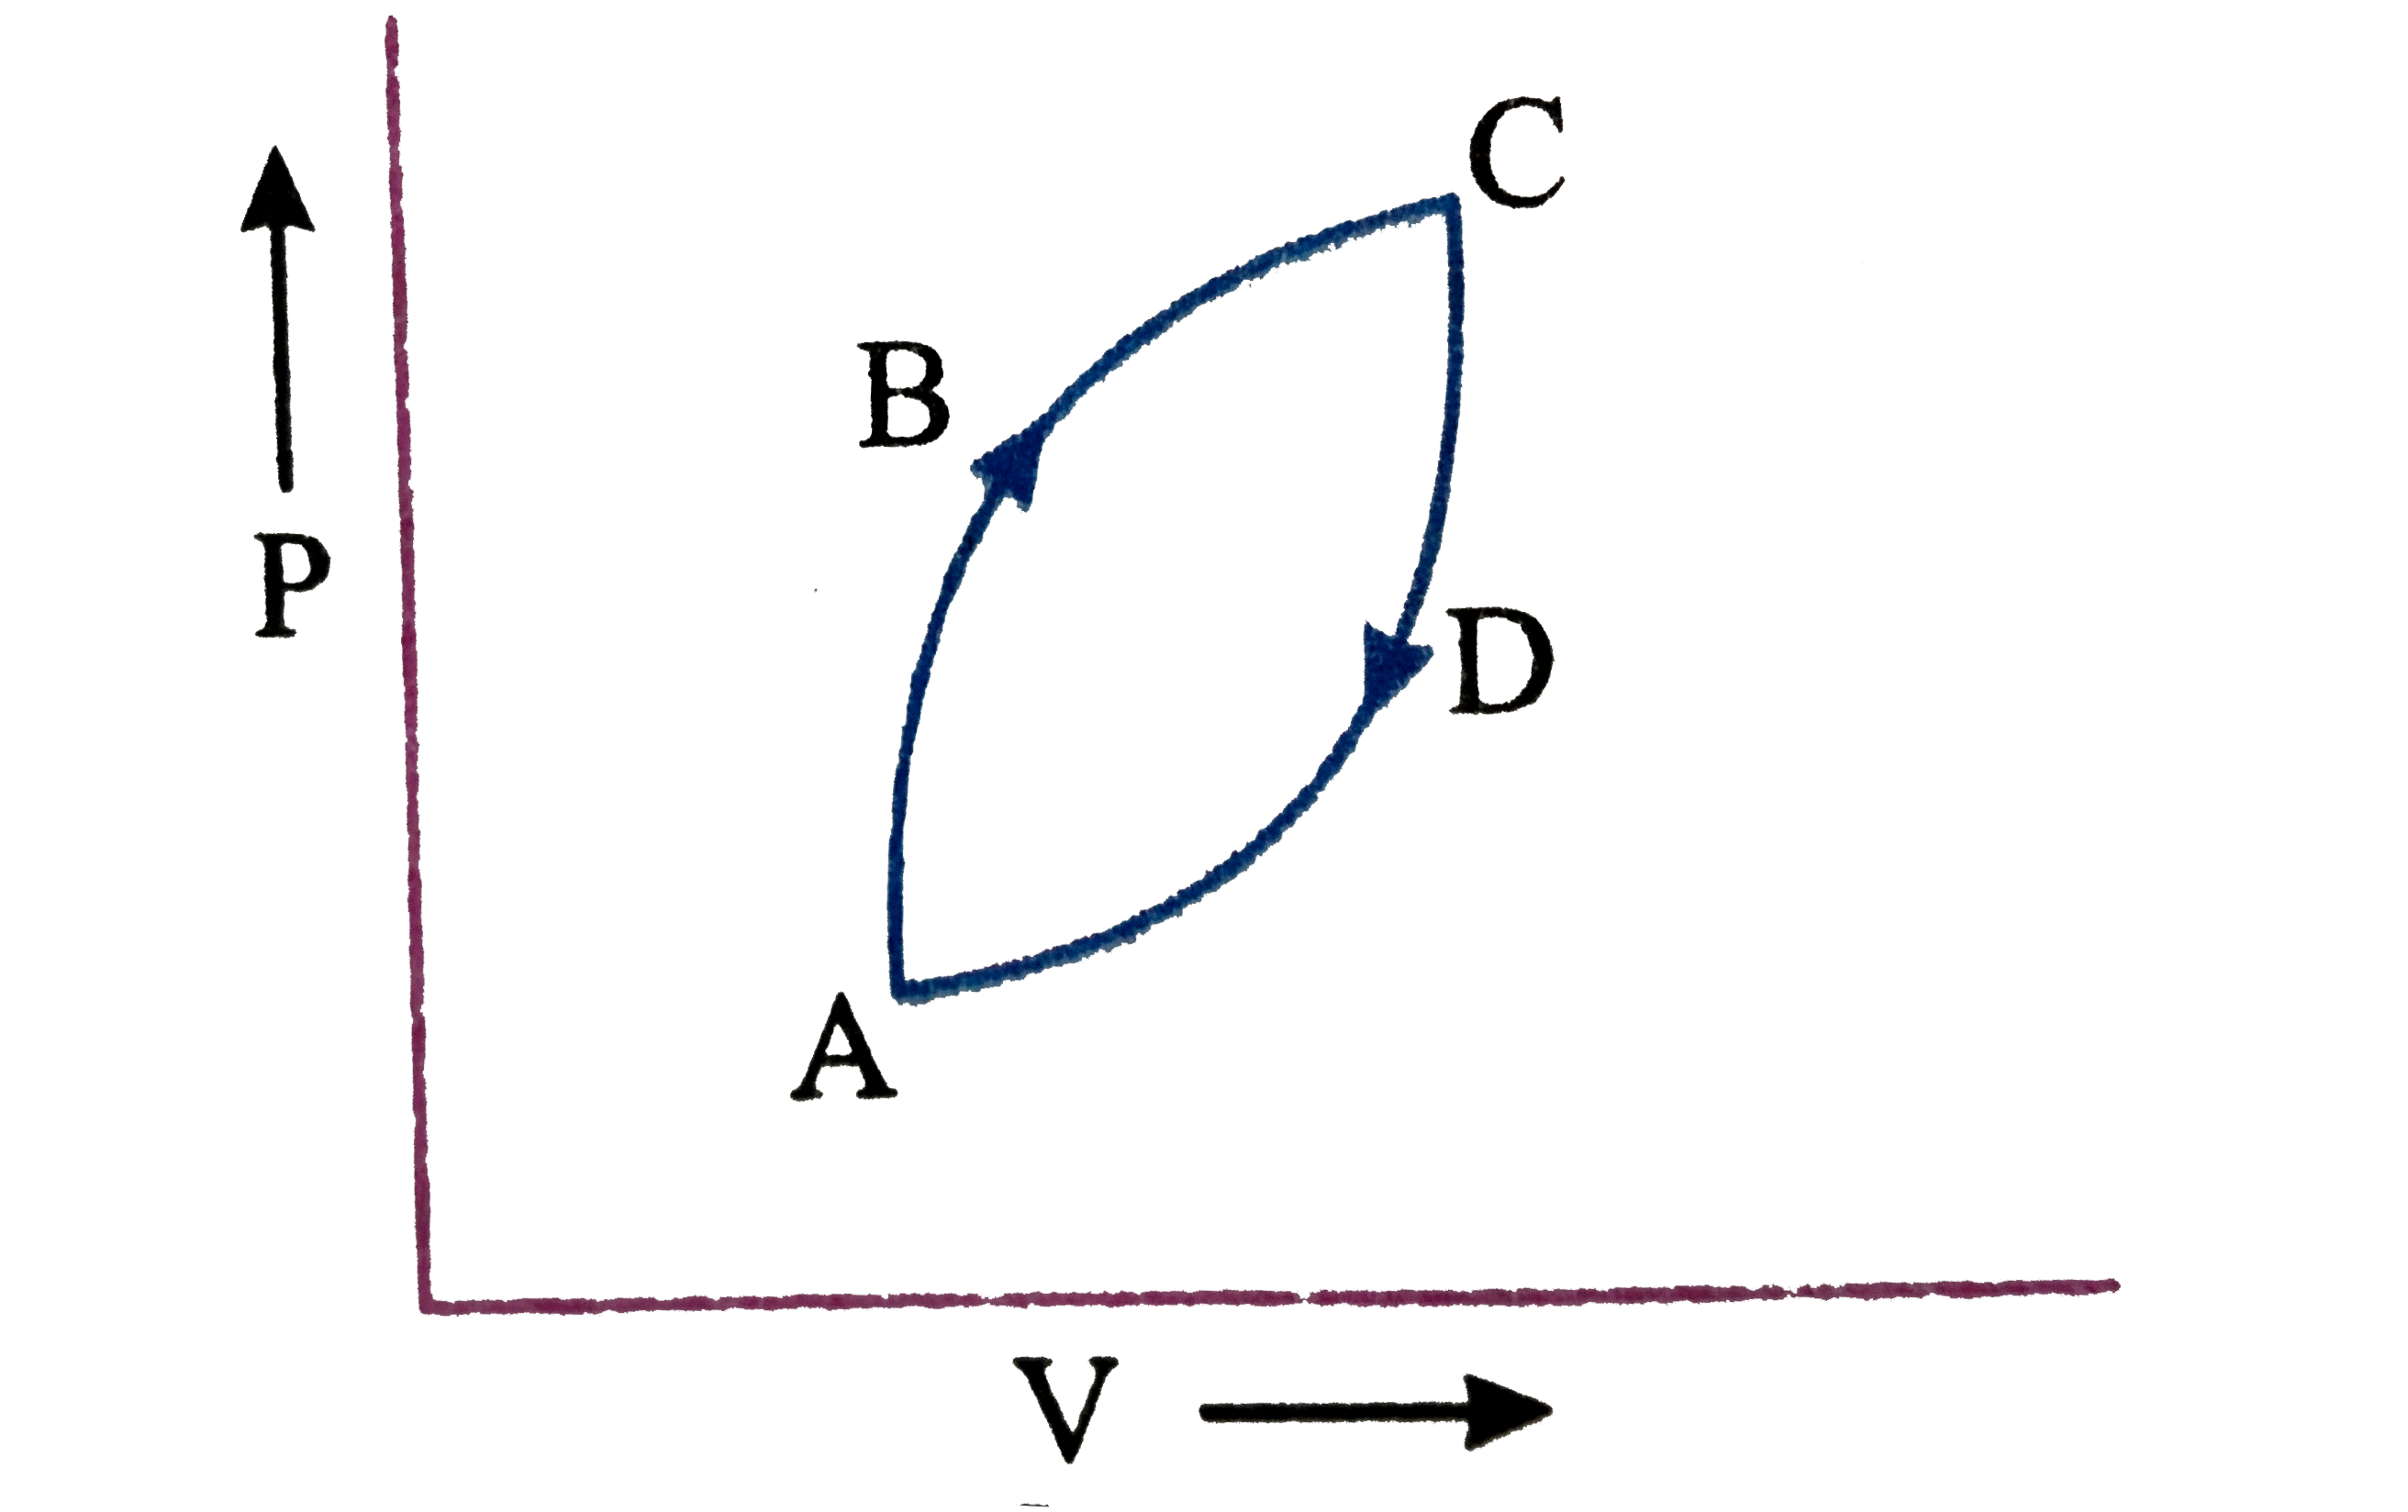 Figure shows the P-V siagram of a cyclic process. If dQ is the heat energy supplied to the system, dU is change in the internal energy of the system and dW is the work done by the system, then which of the following relations is/are correct